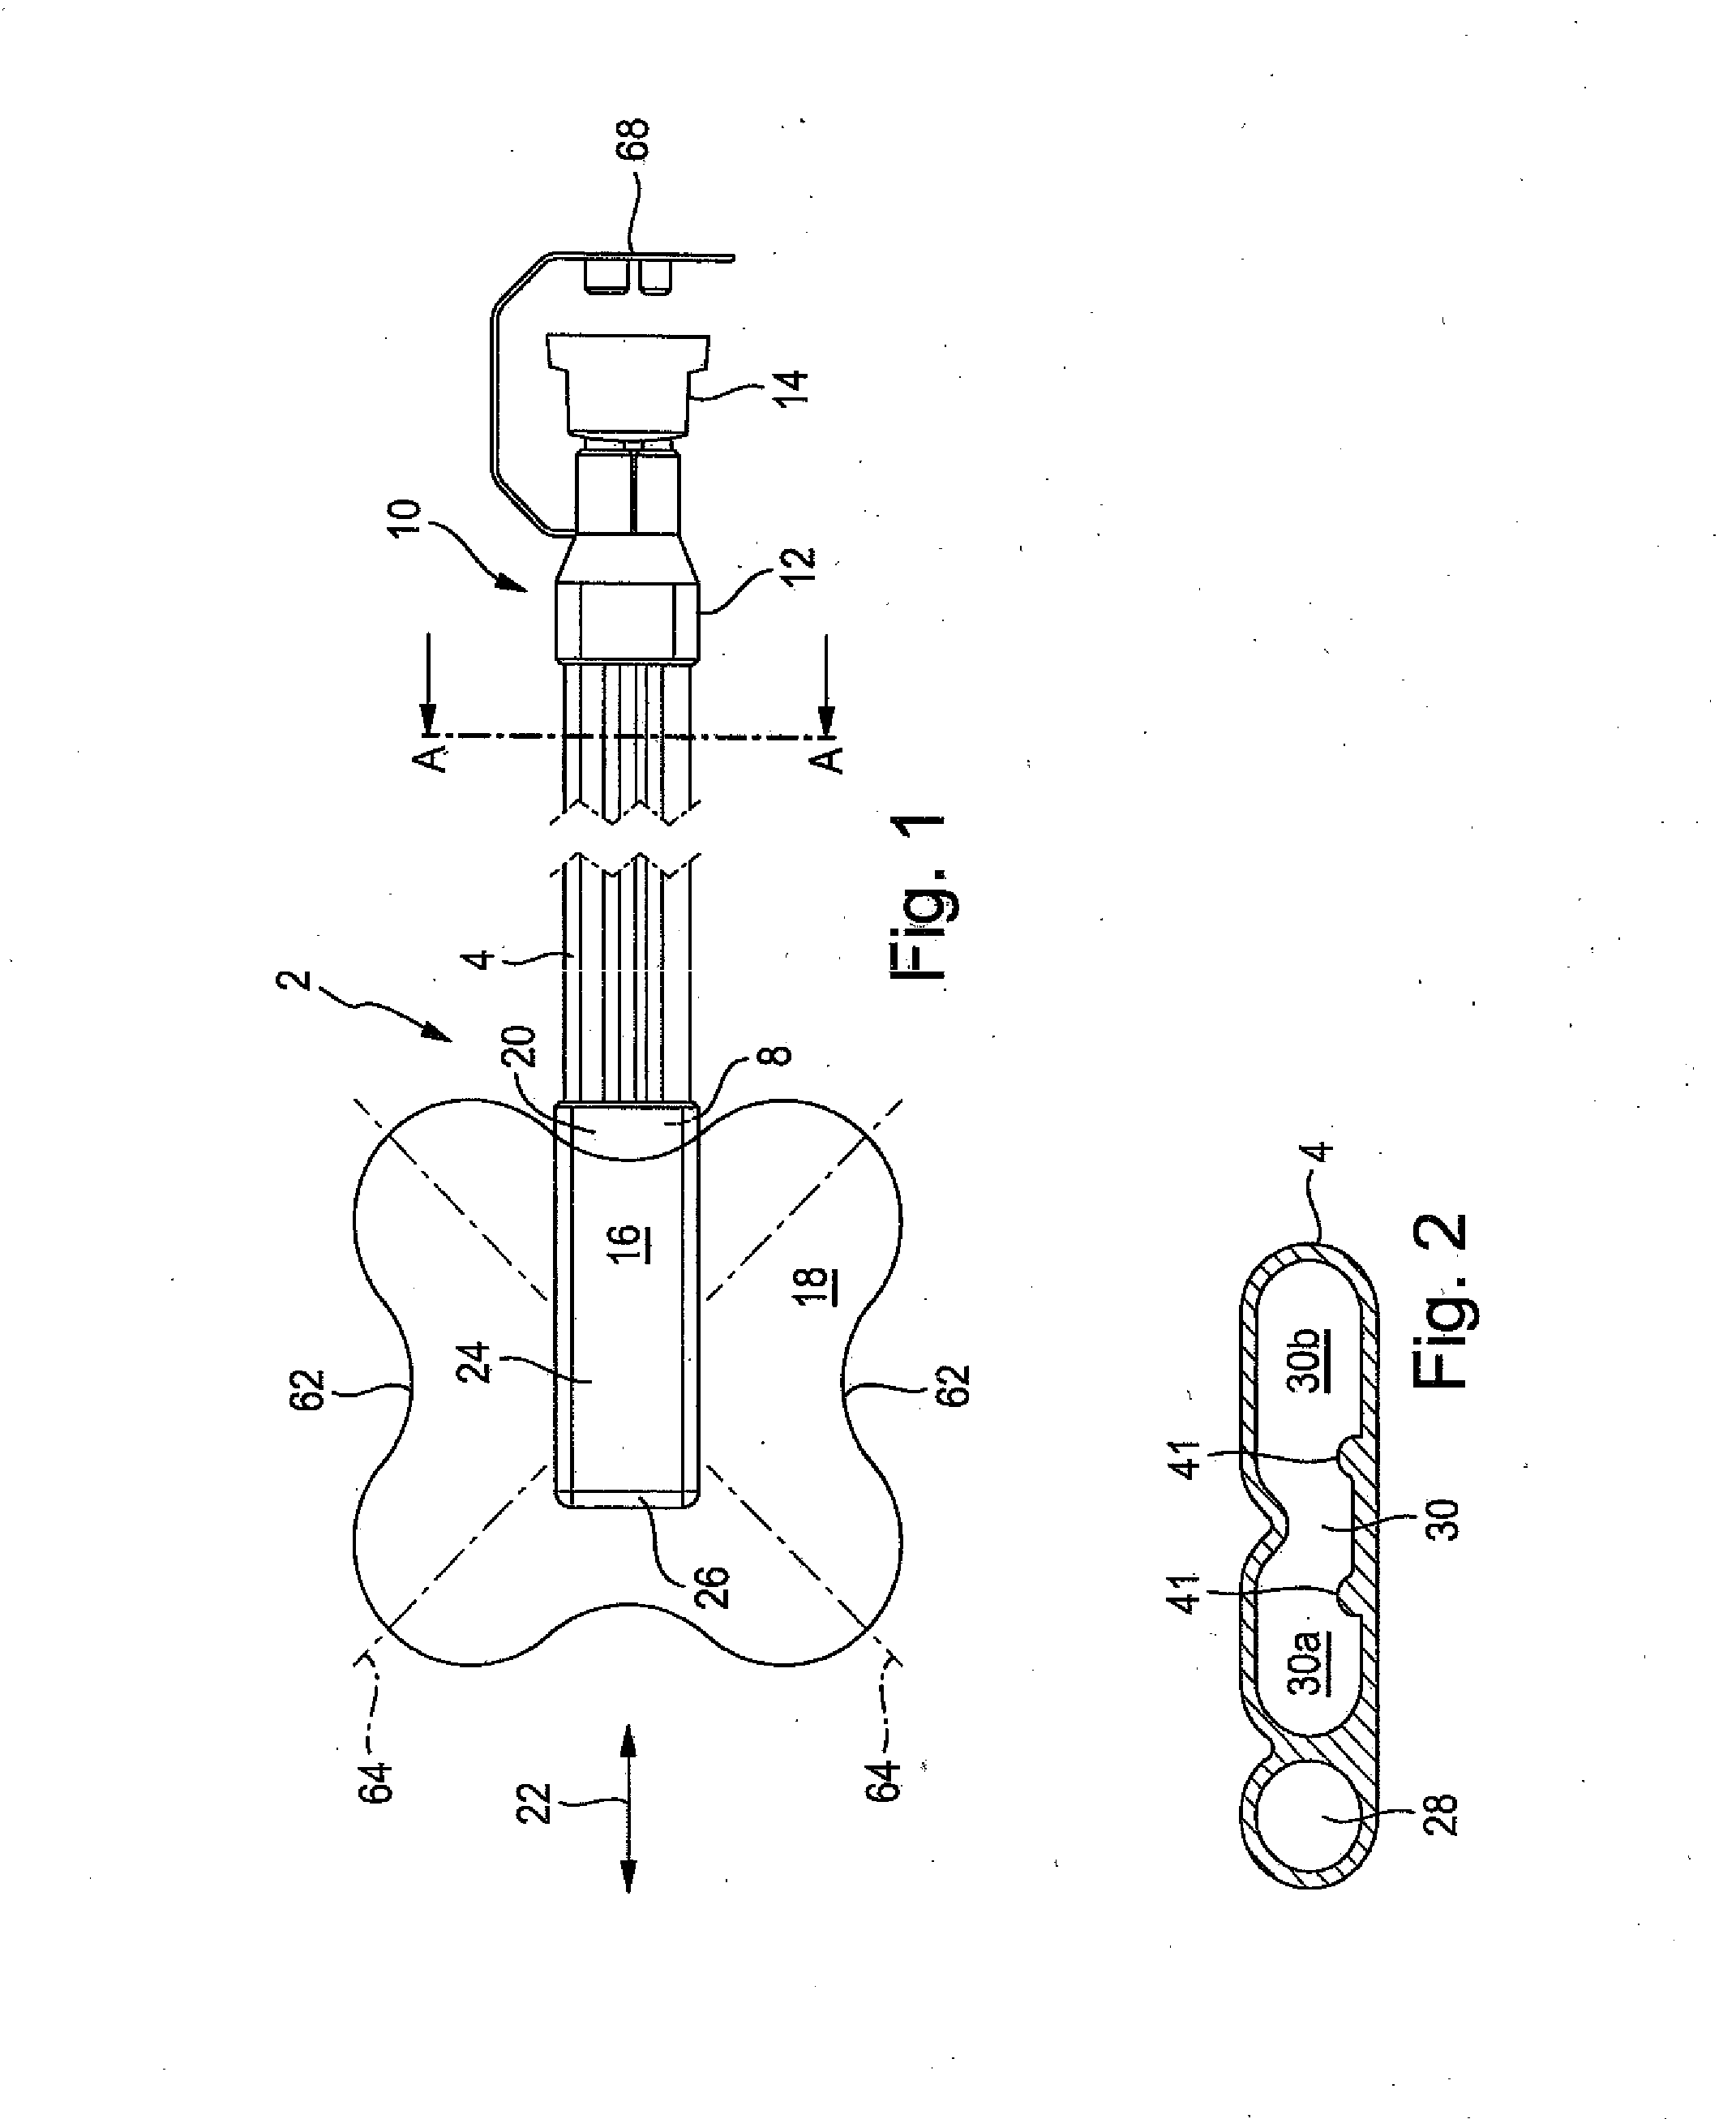 Method for producing a connection device for use in the negative pressure treatment of wounds